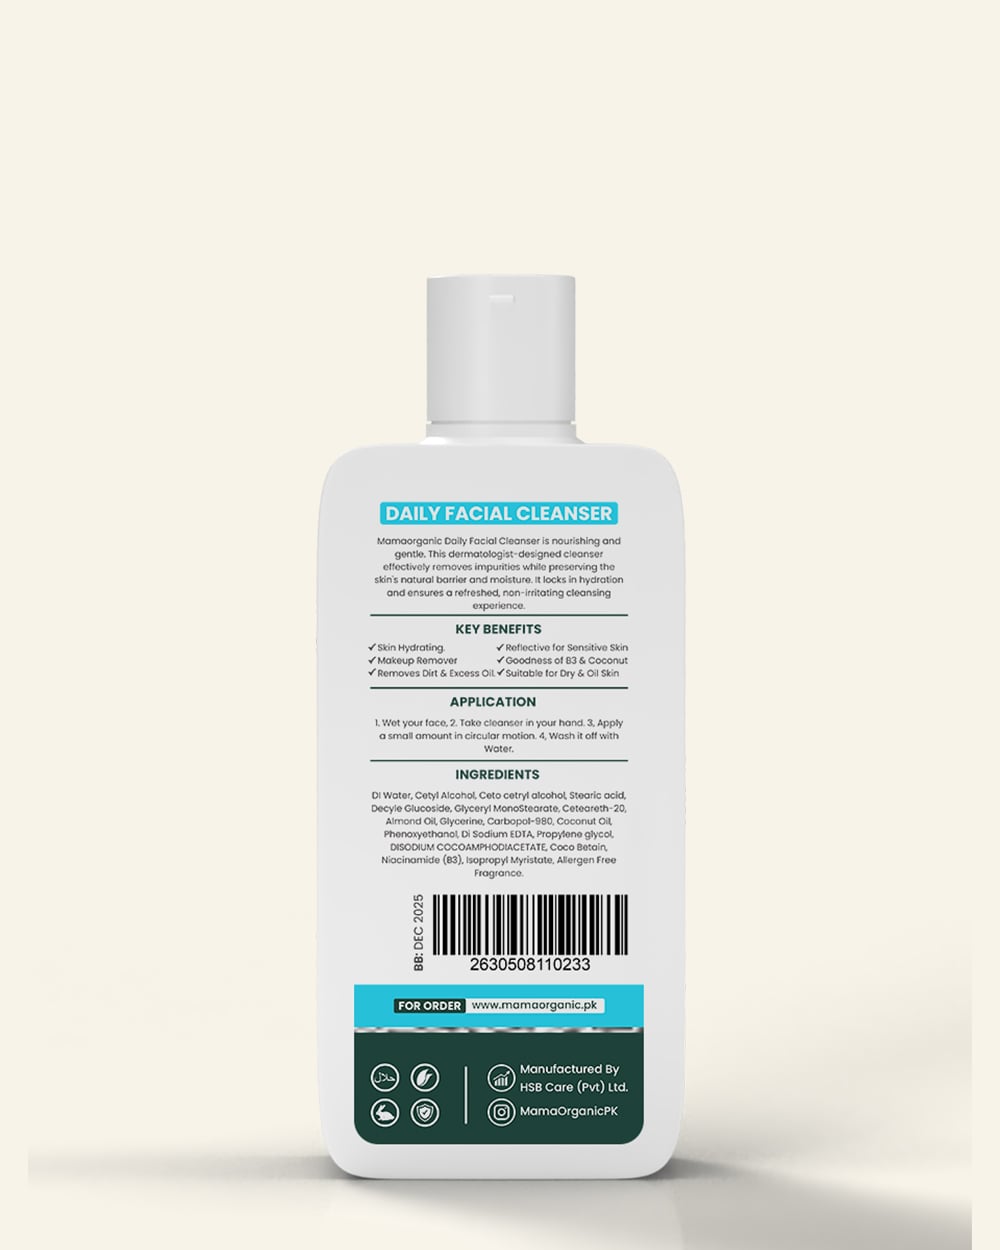 Daily Facial Cleanser 80ml in Pakistan